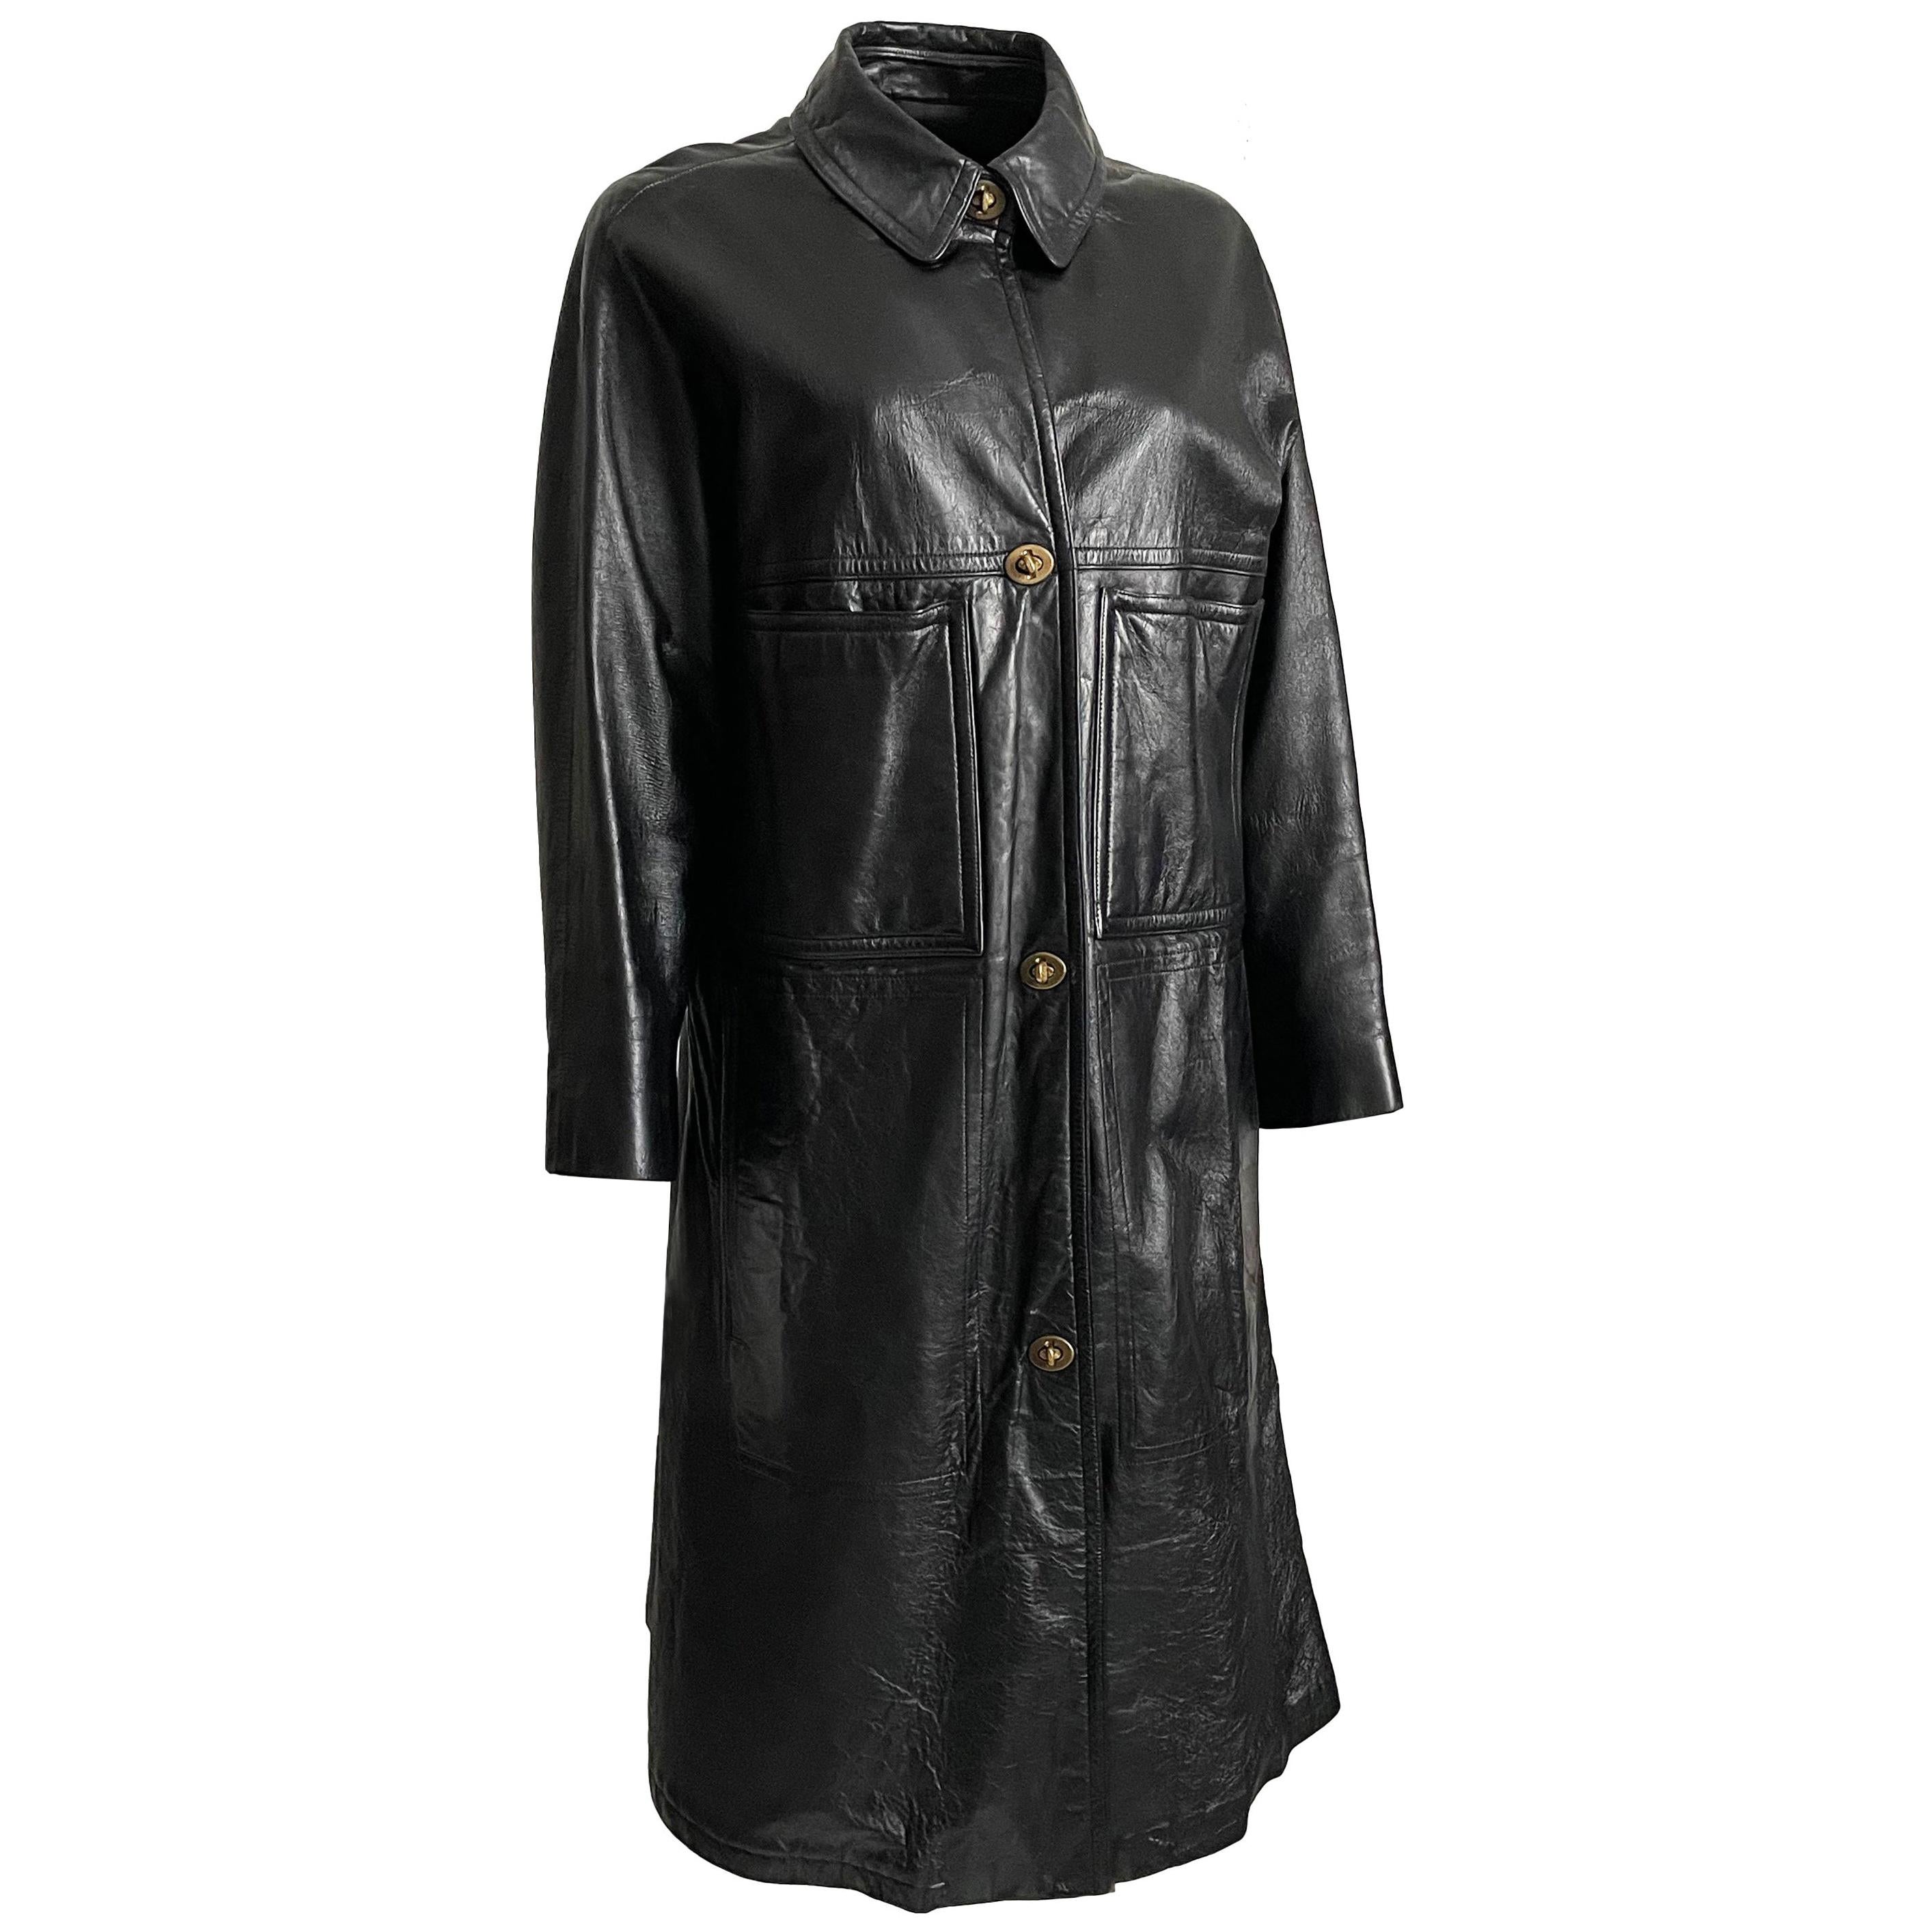 Bonnie Cashin Sills Black Leather Coat with Turnlock Fasteners 